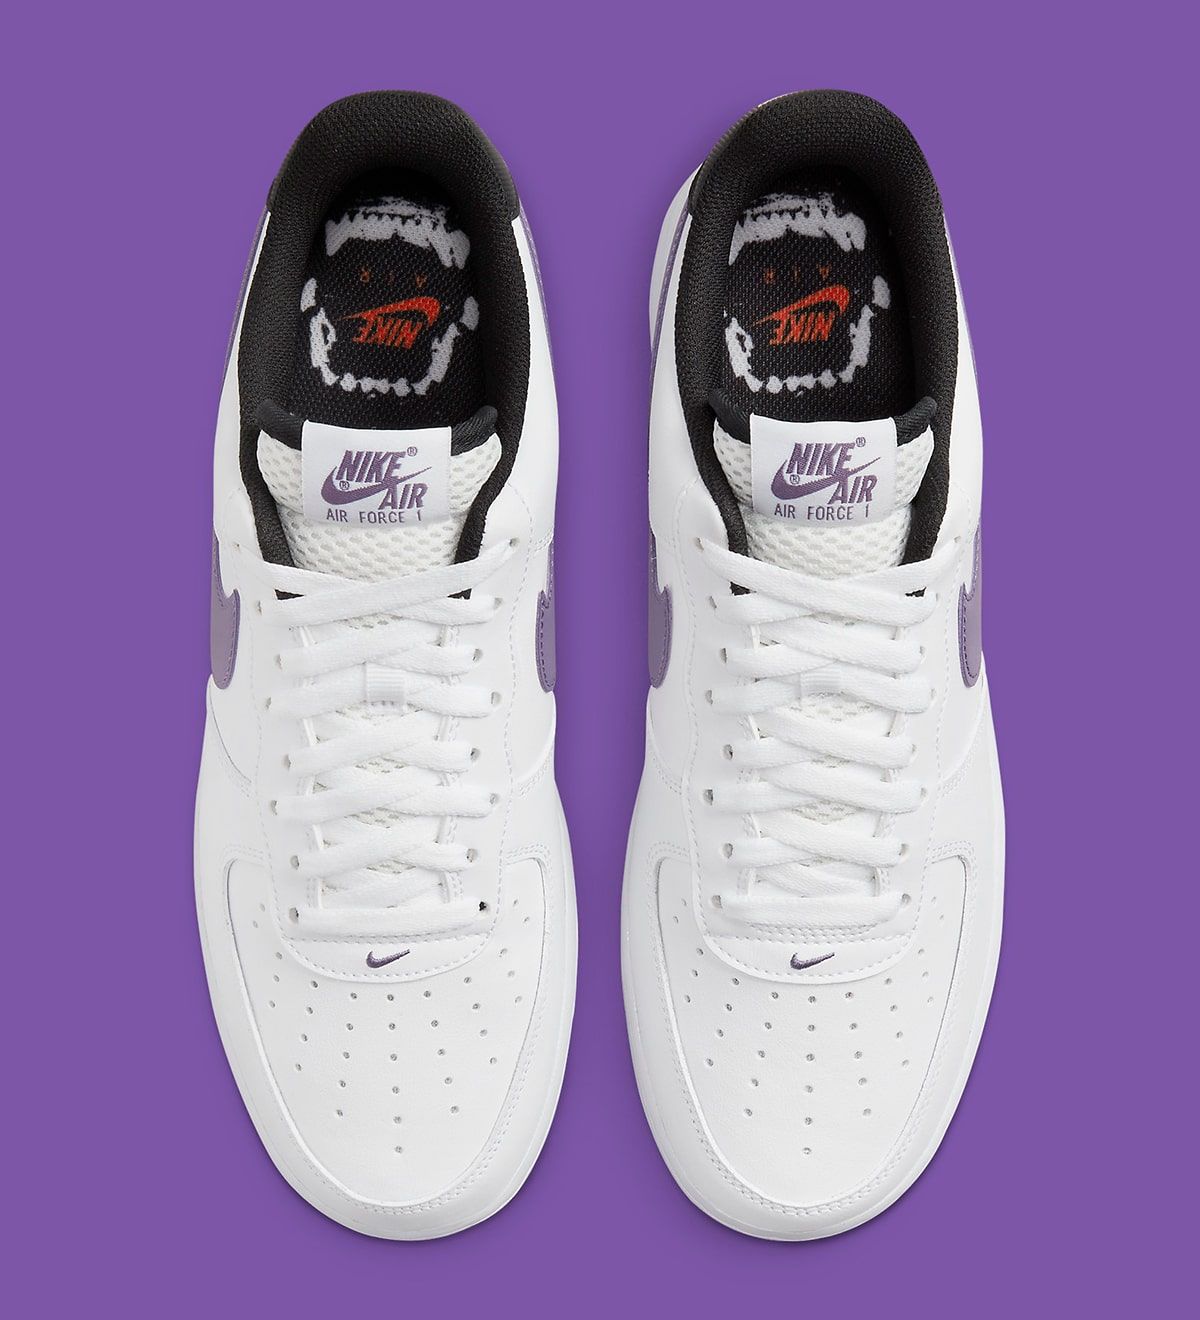 Nike Air Force 1 Hoops DH7440-001 Release Date